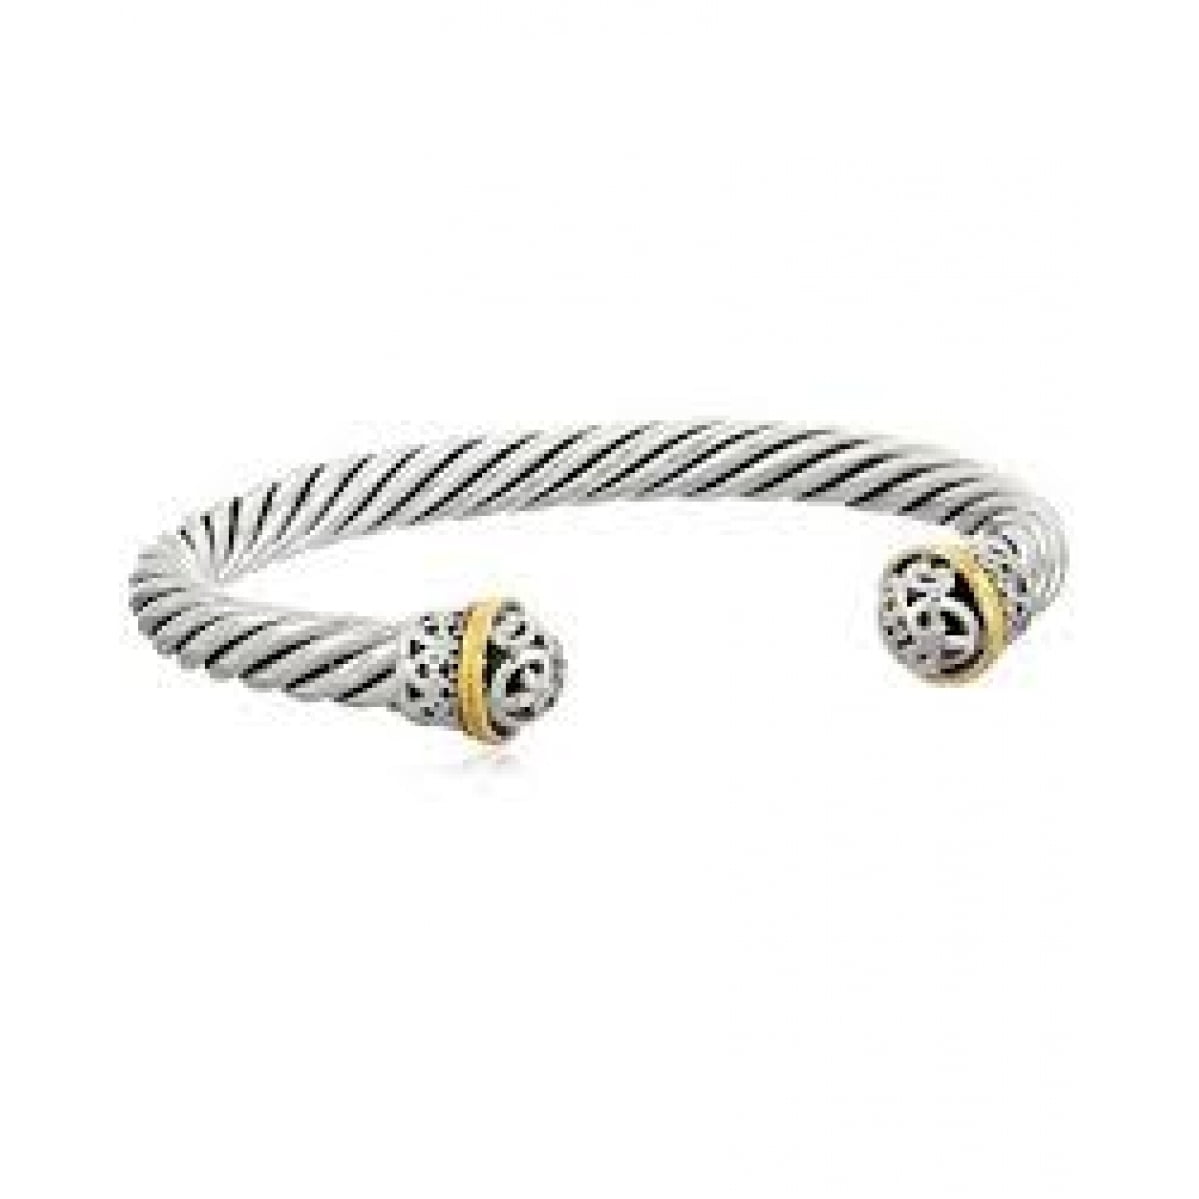 Accessorize Great gold tone metal with black material bracelet from Accessorize 